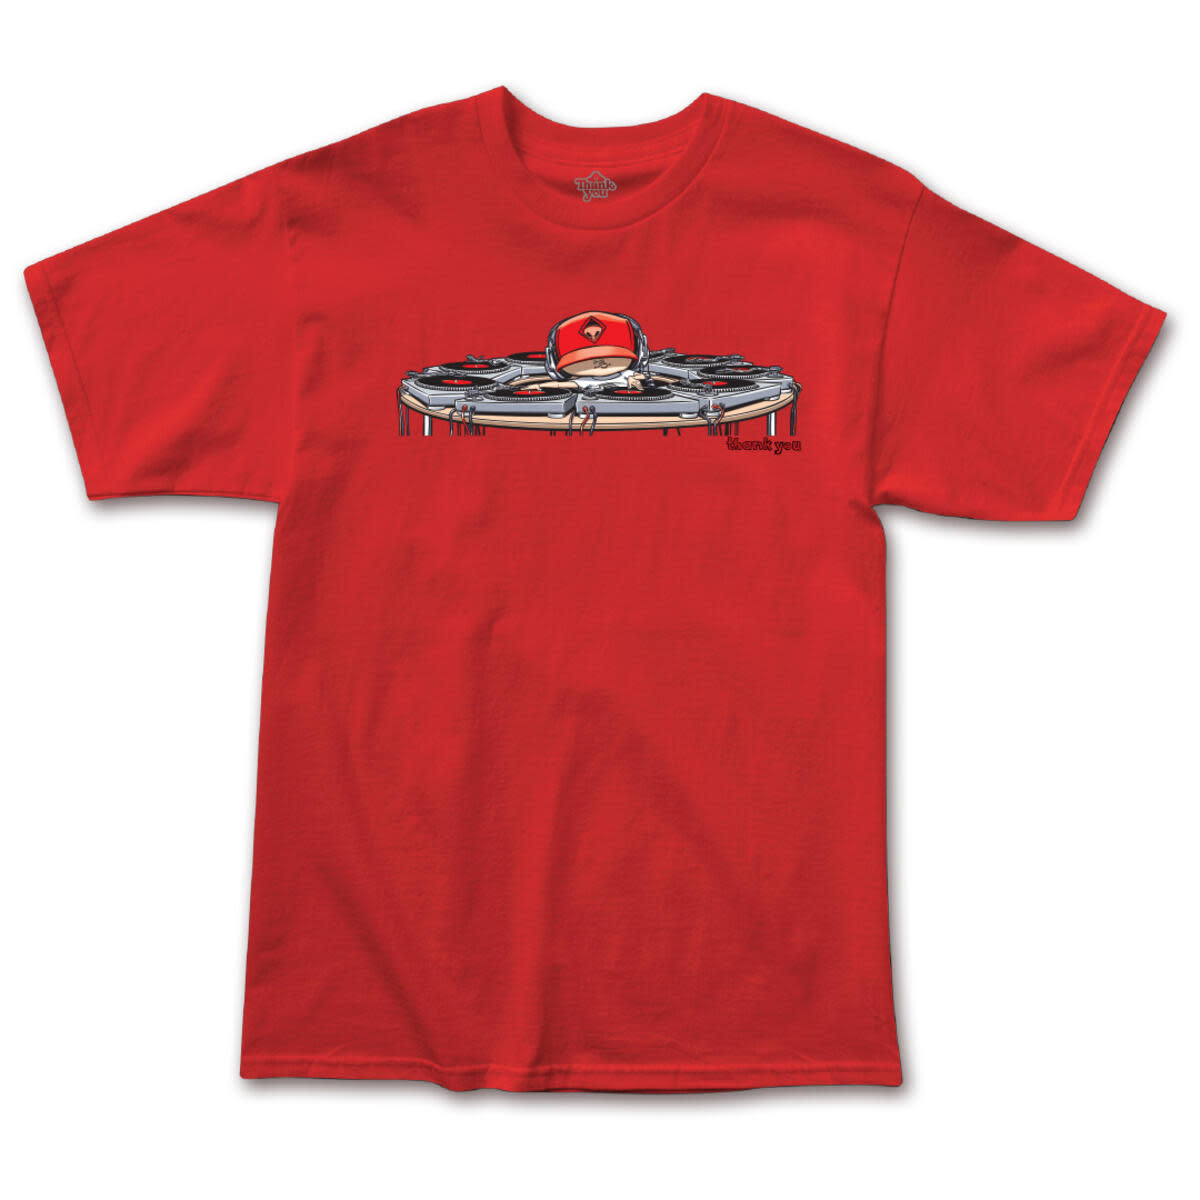 Thank You Ronnie Creager Mix Master Tee Red